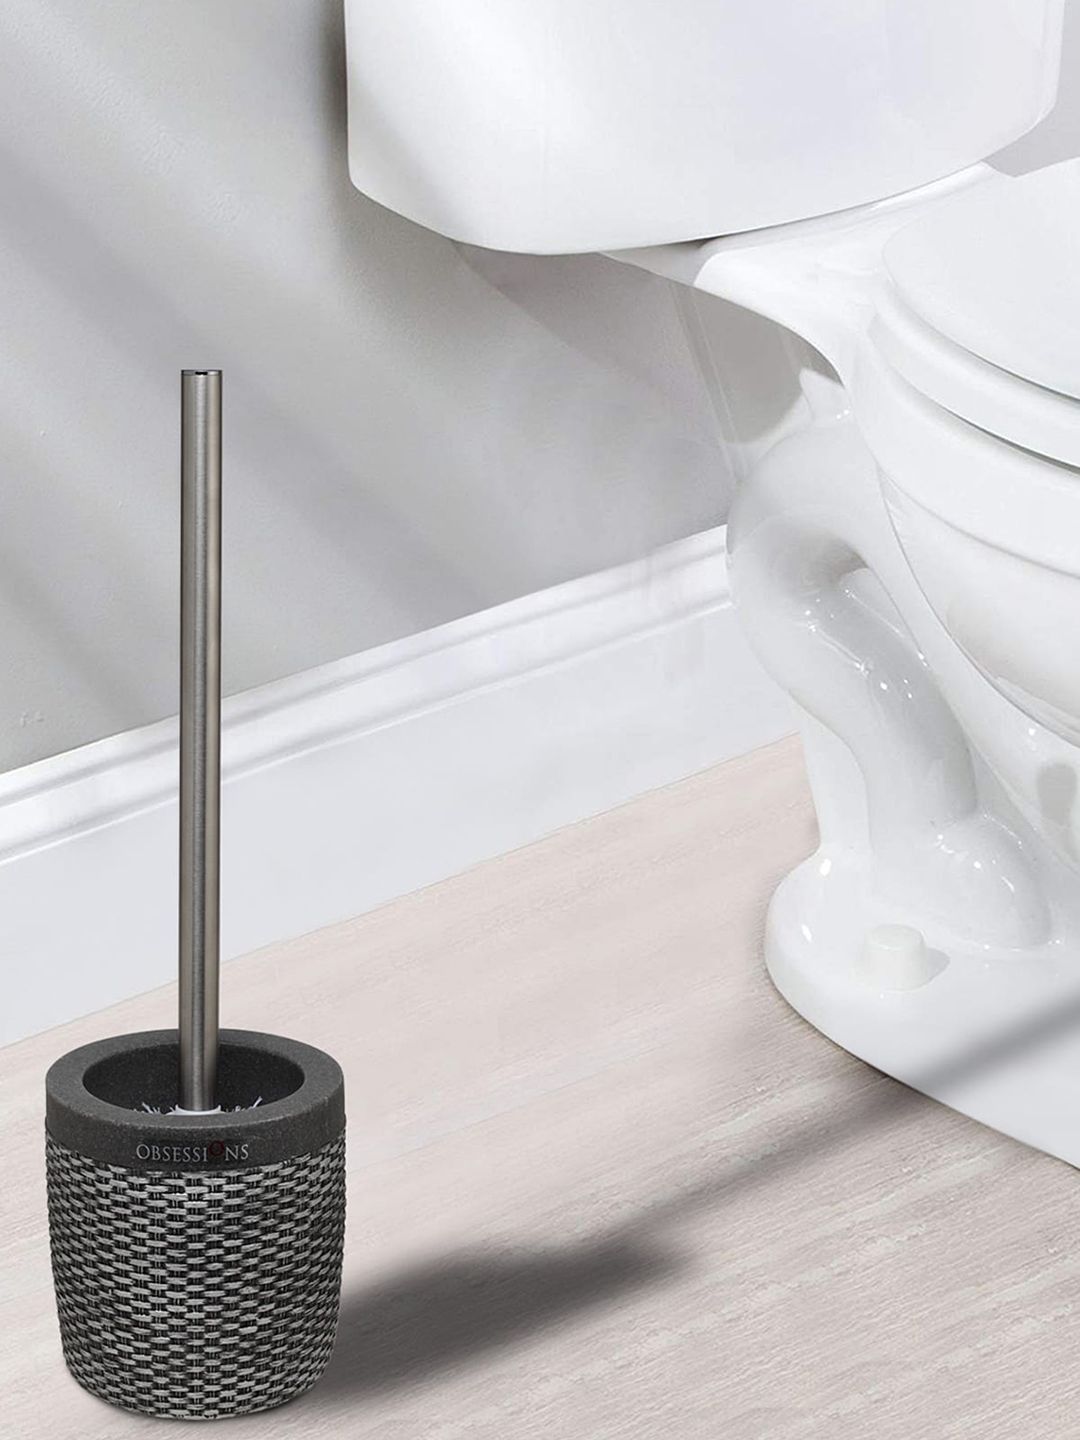 OBSESSIONS Grey Textured Polyresin Toilet Brush With Holder Price in India